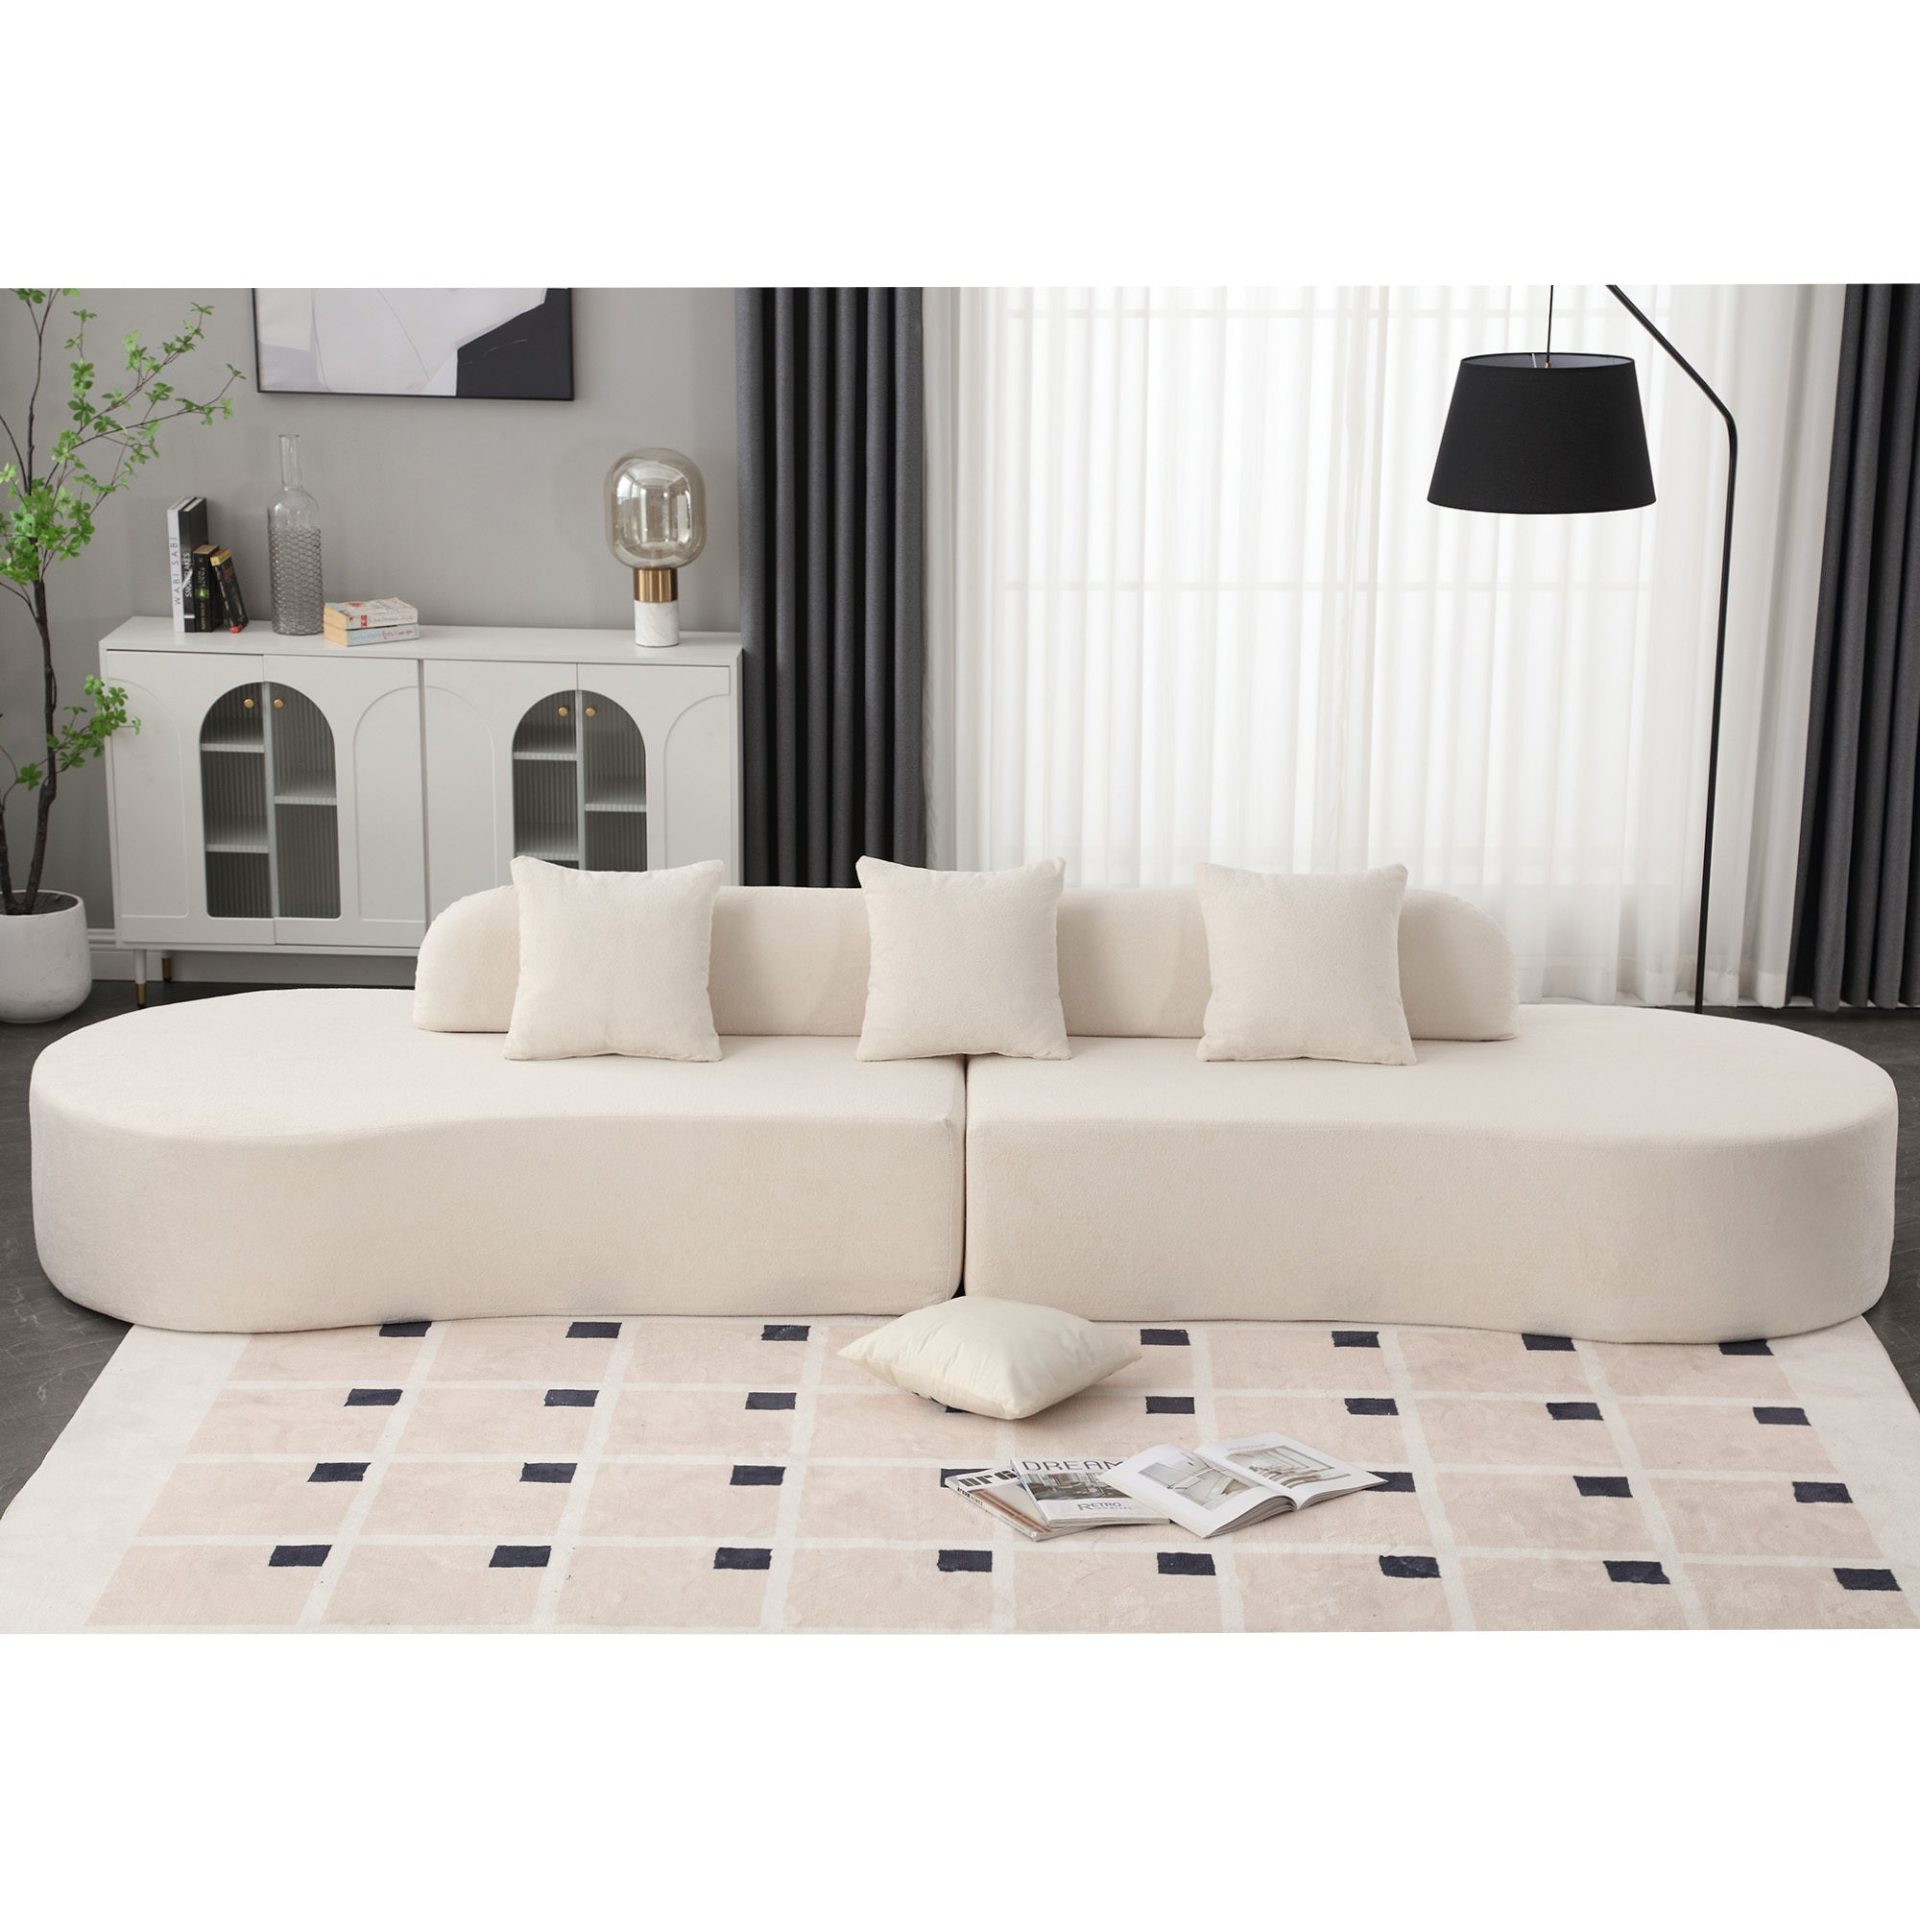 Modern curved combination sofa, terrycloth fabric sofa, minimalist sofa in living room, apartment, no assembly required, three  pillows,Beige, Goodies N Stuff